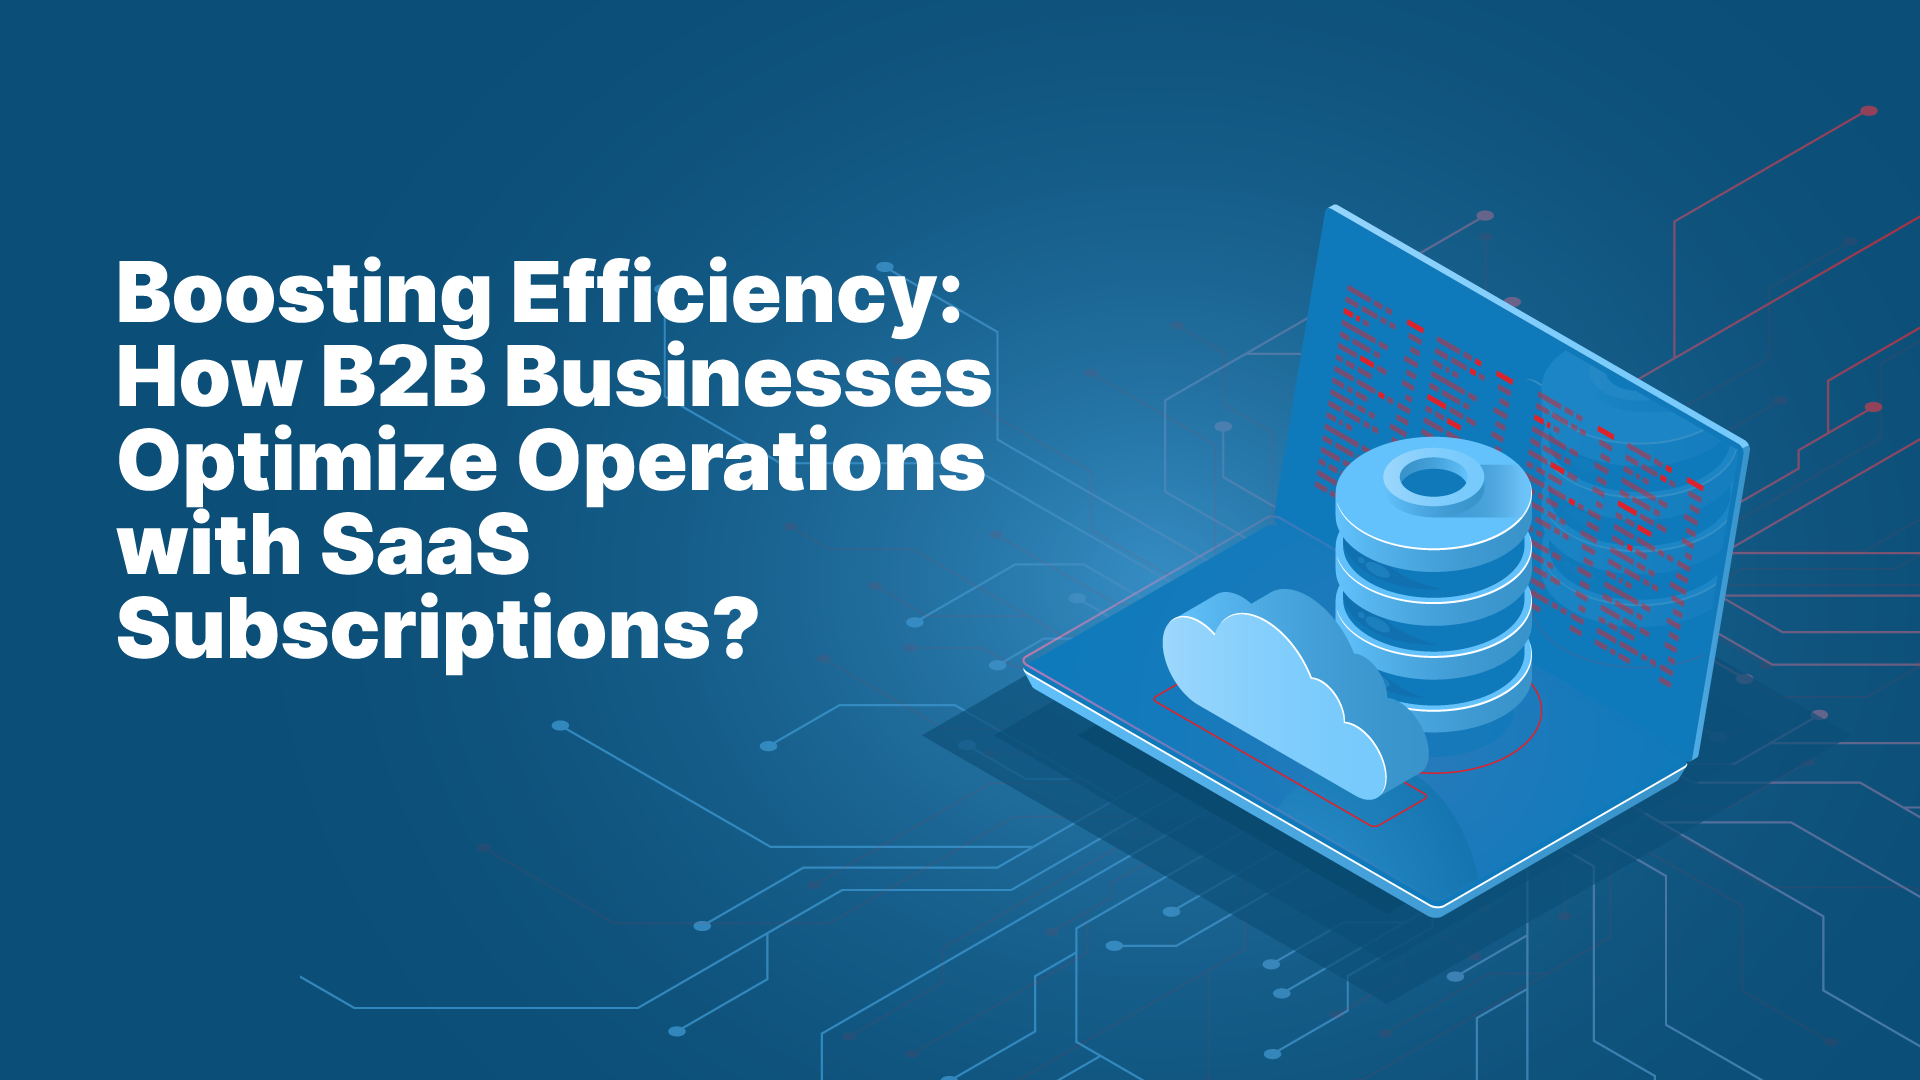 Boosting Efficiency: How B2B Businesses Optimize Operations with SaaS Subscriptions